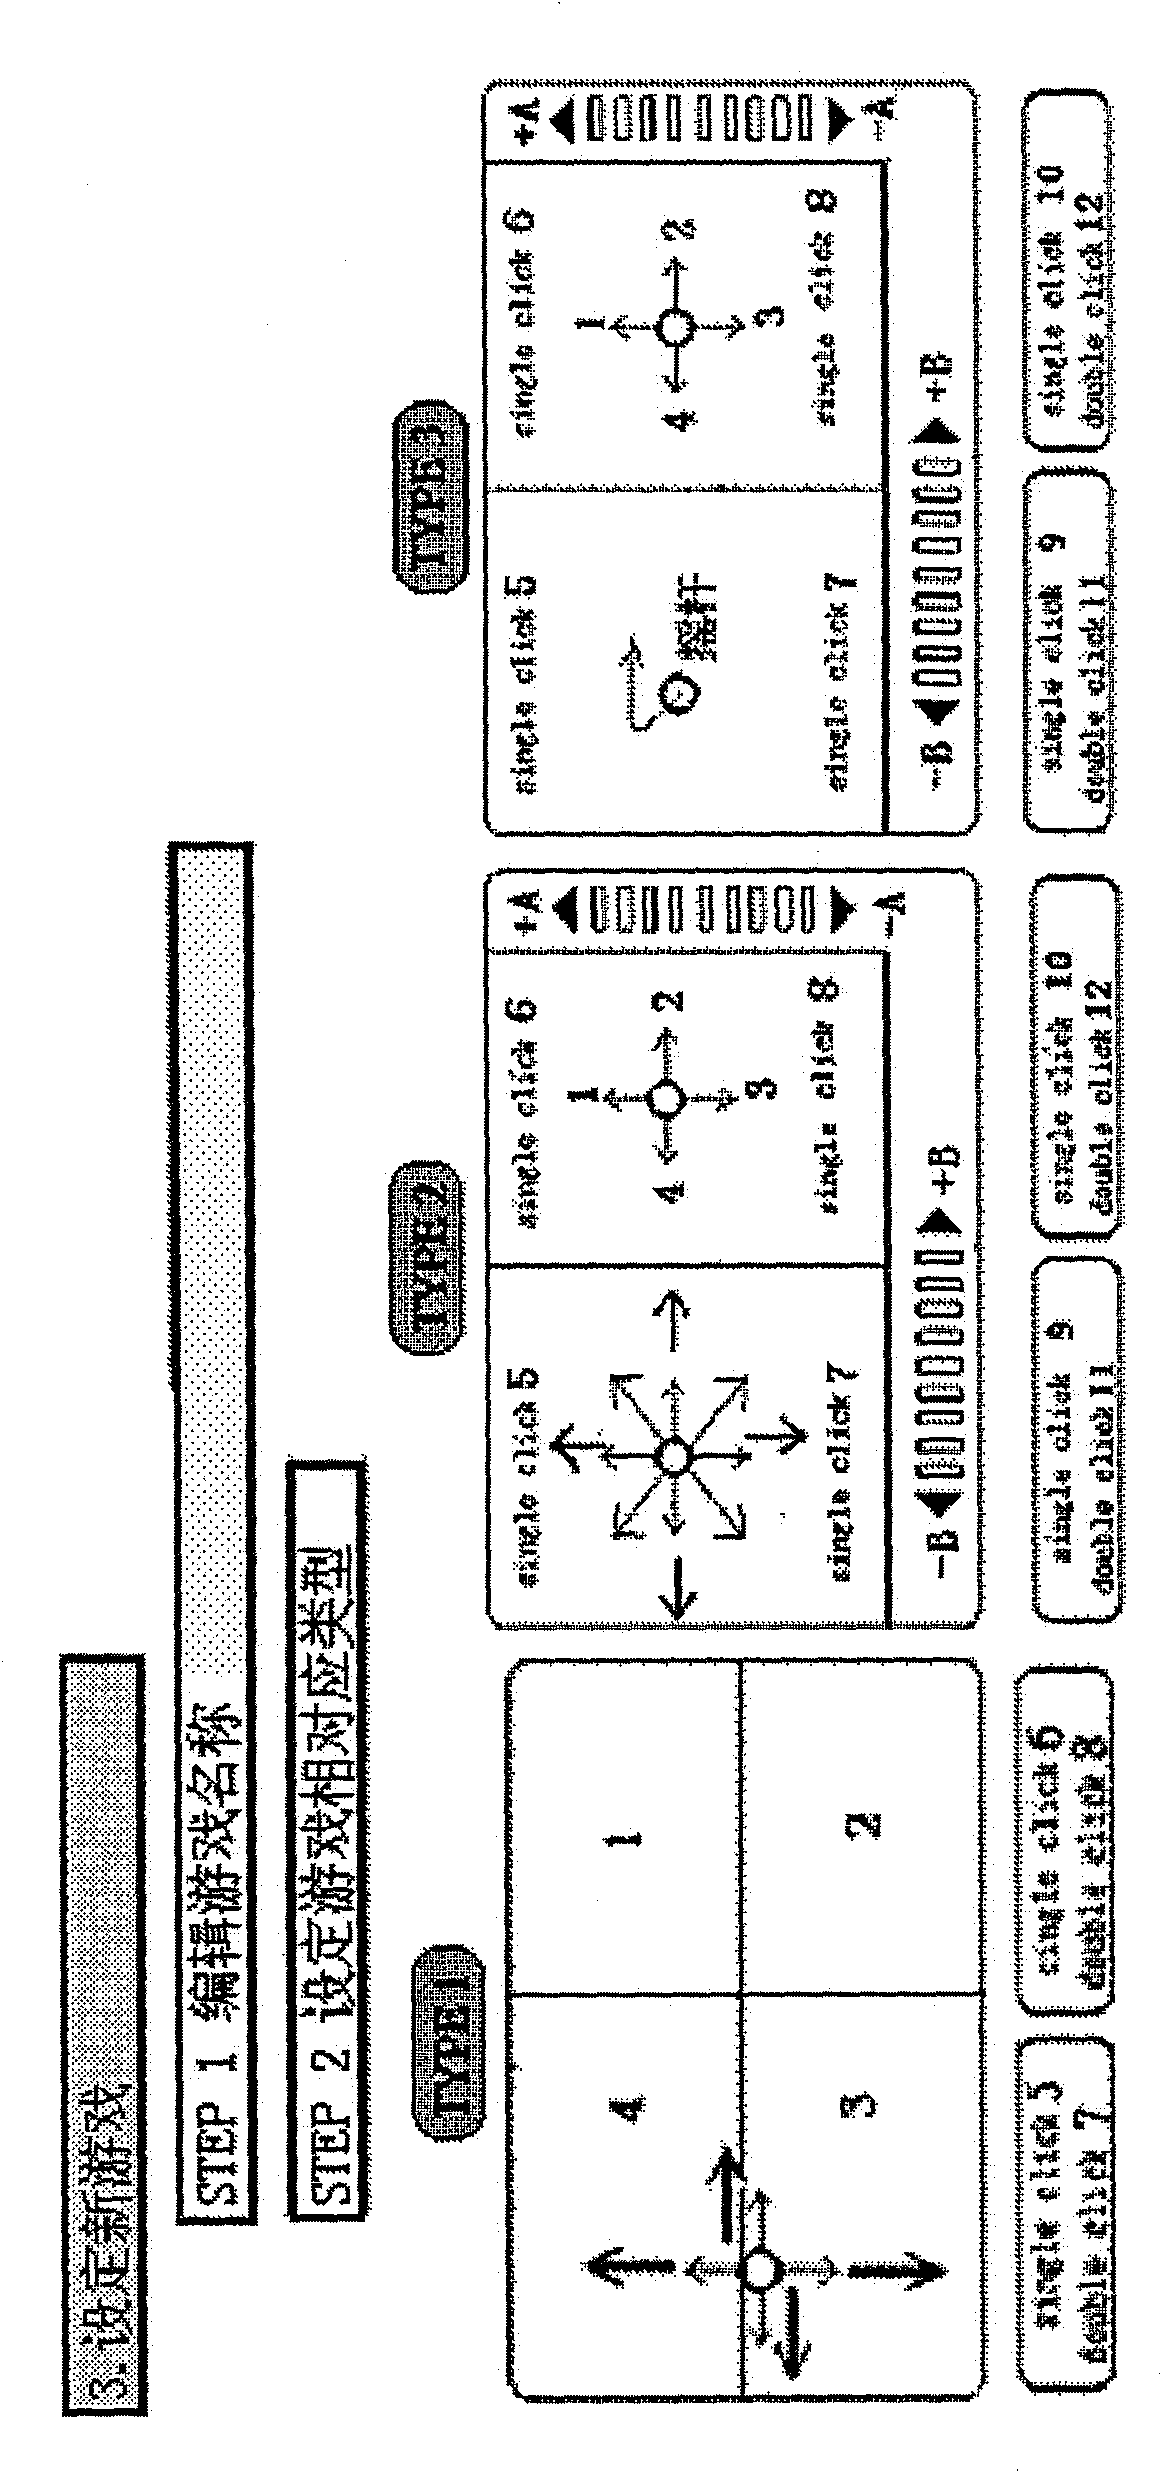 Method of using touch module as game controller